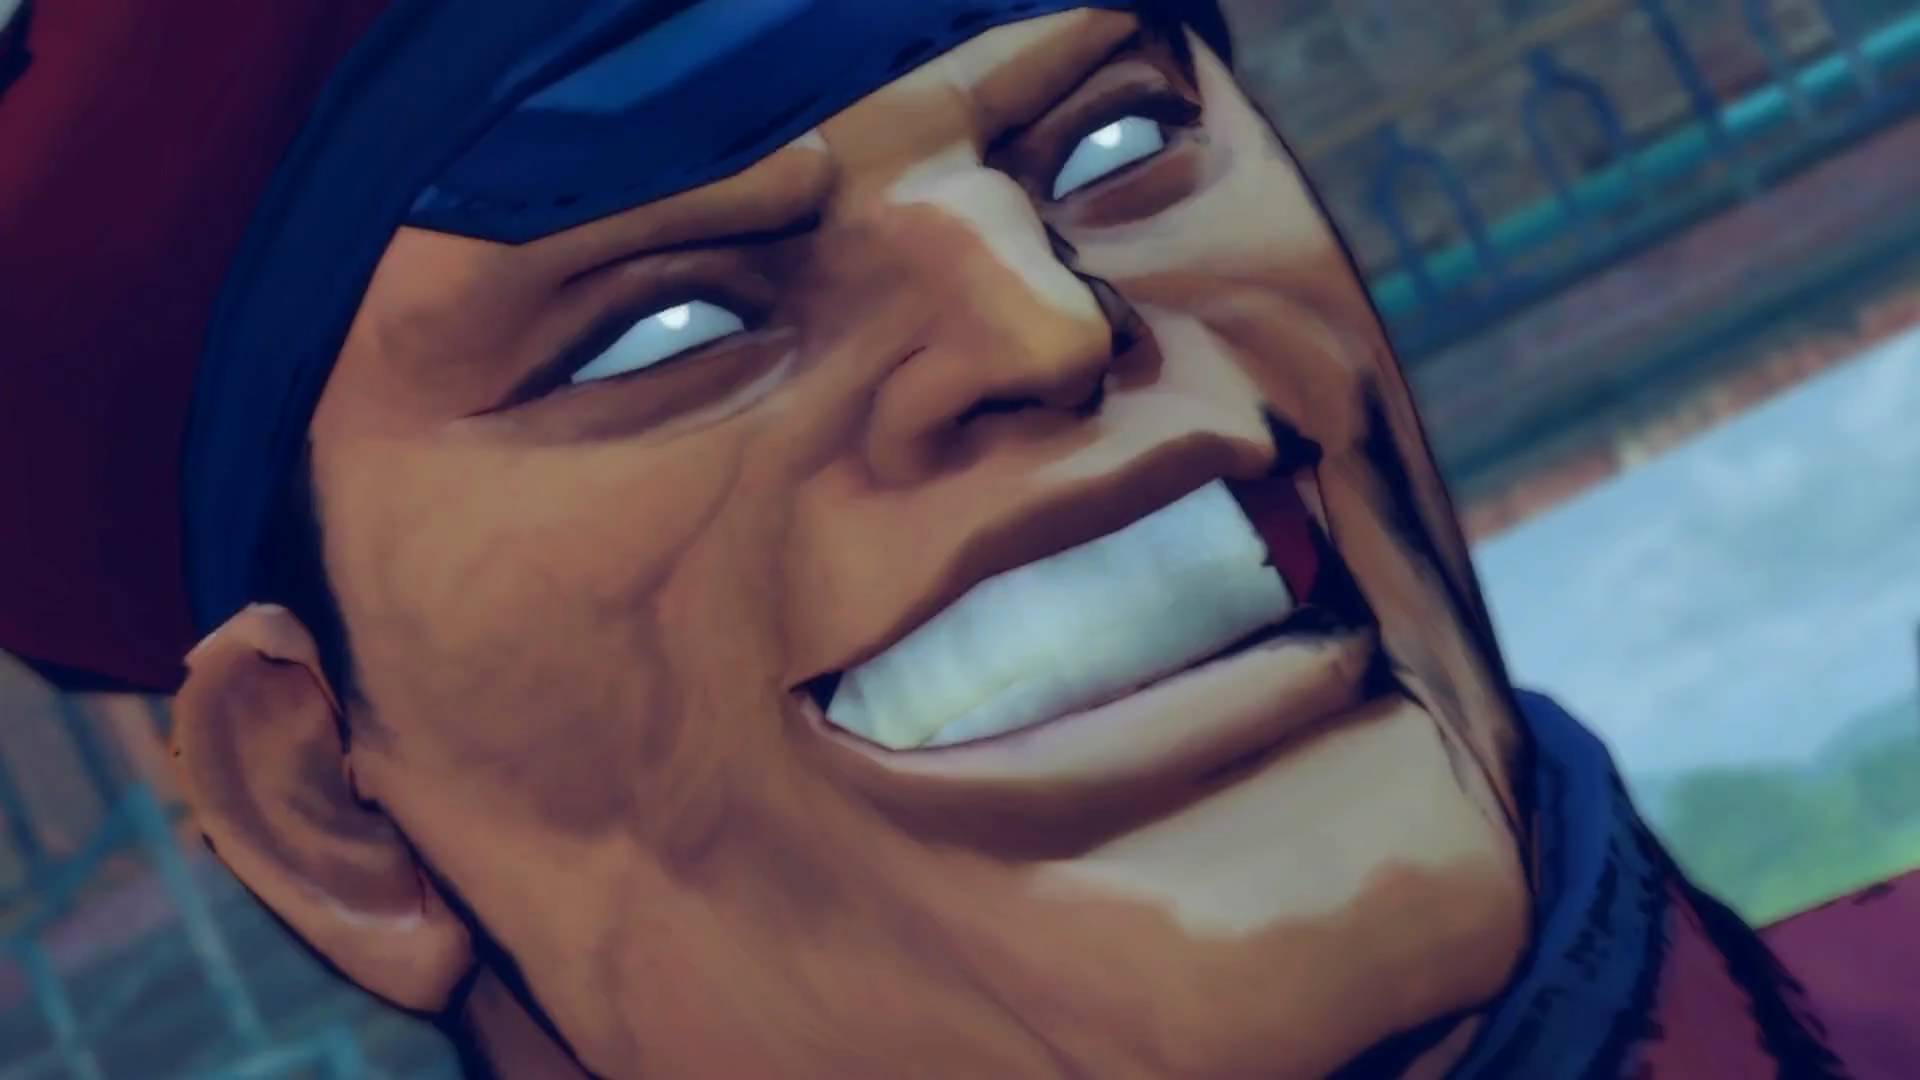 m.bison's face Memes - Imgflip.